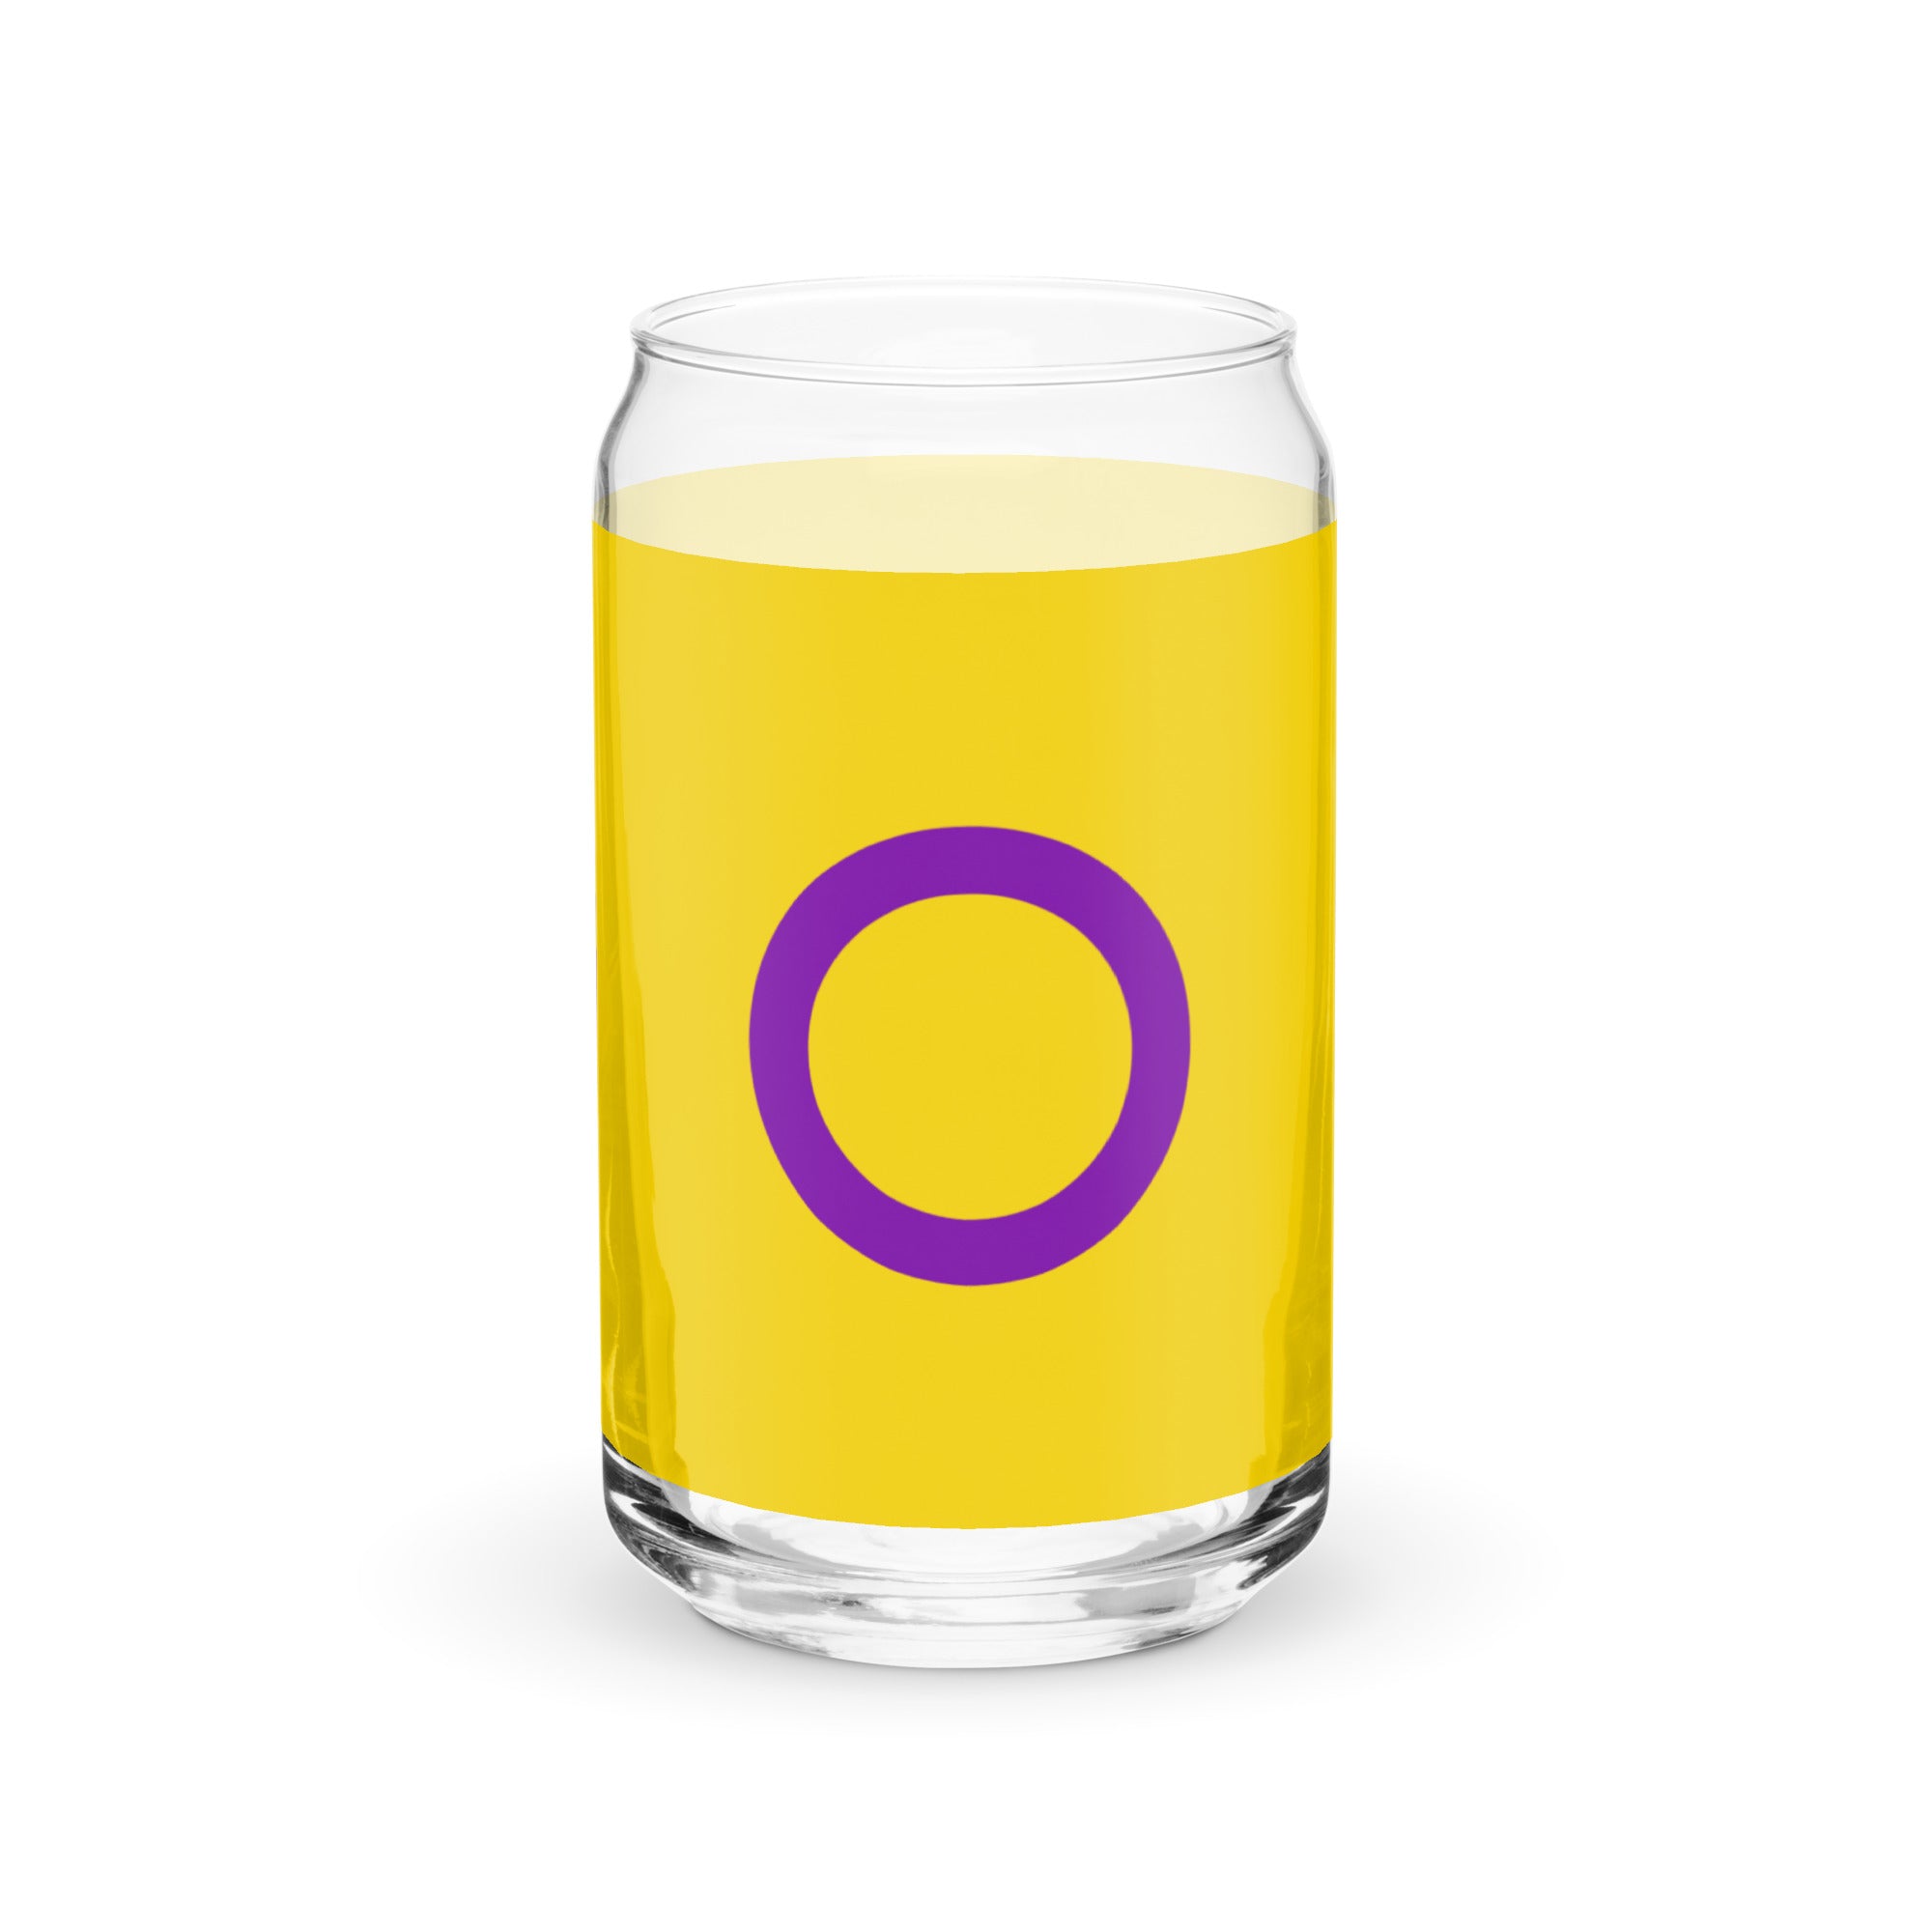 Intersex Can-Shaped Glass